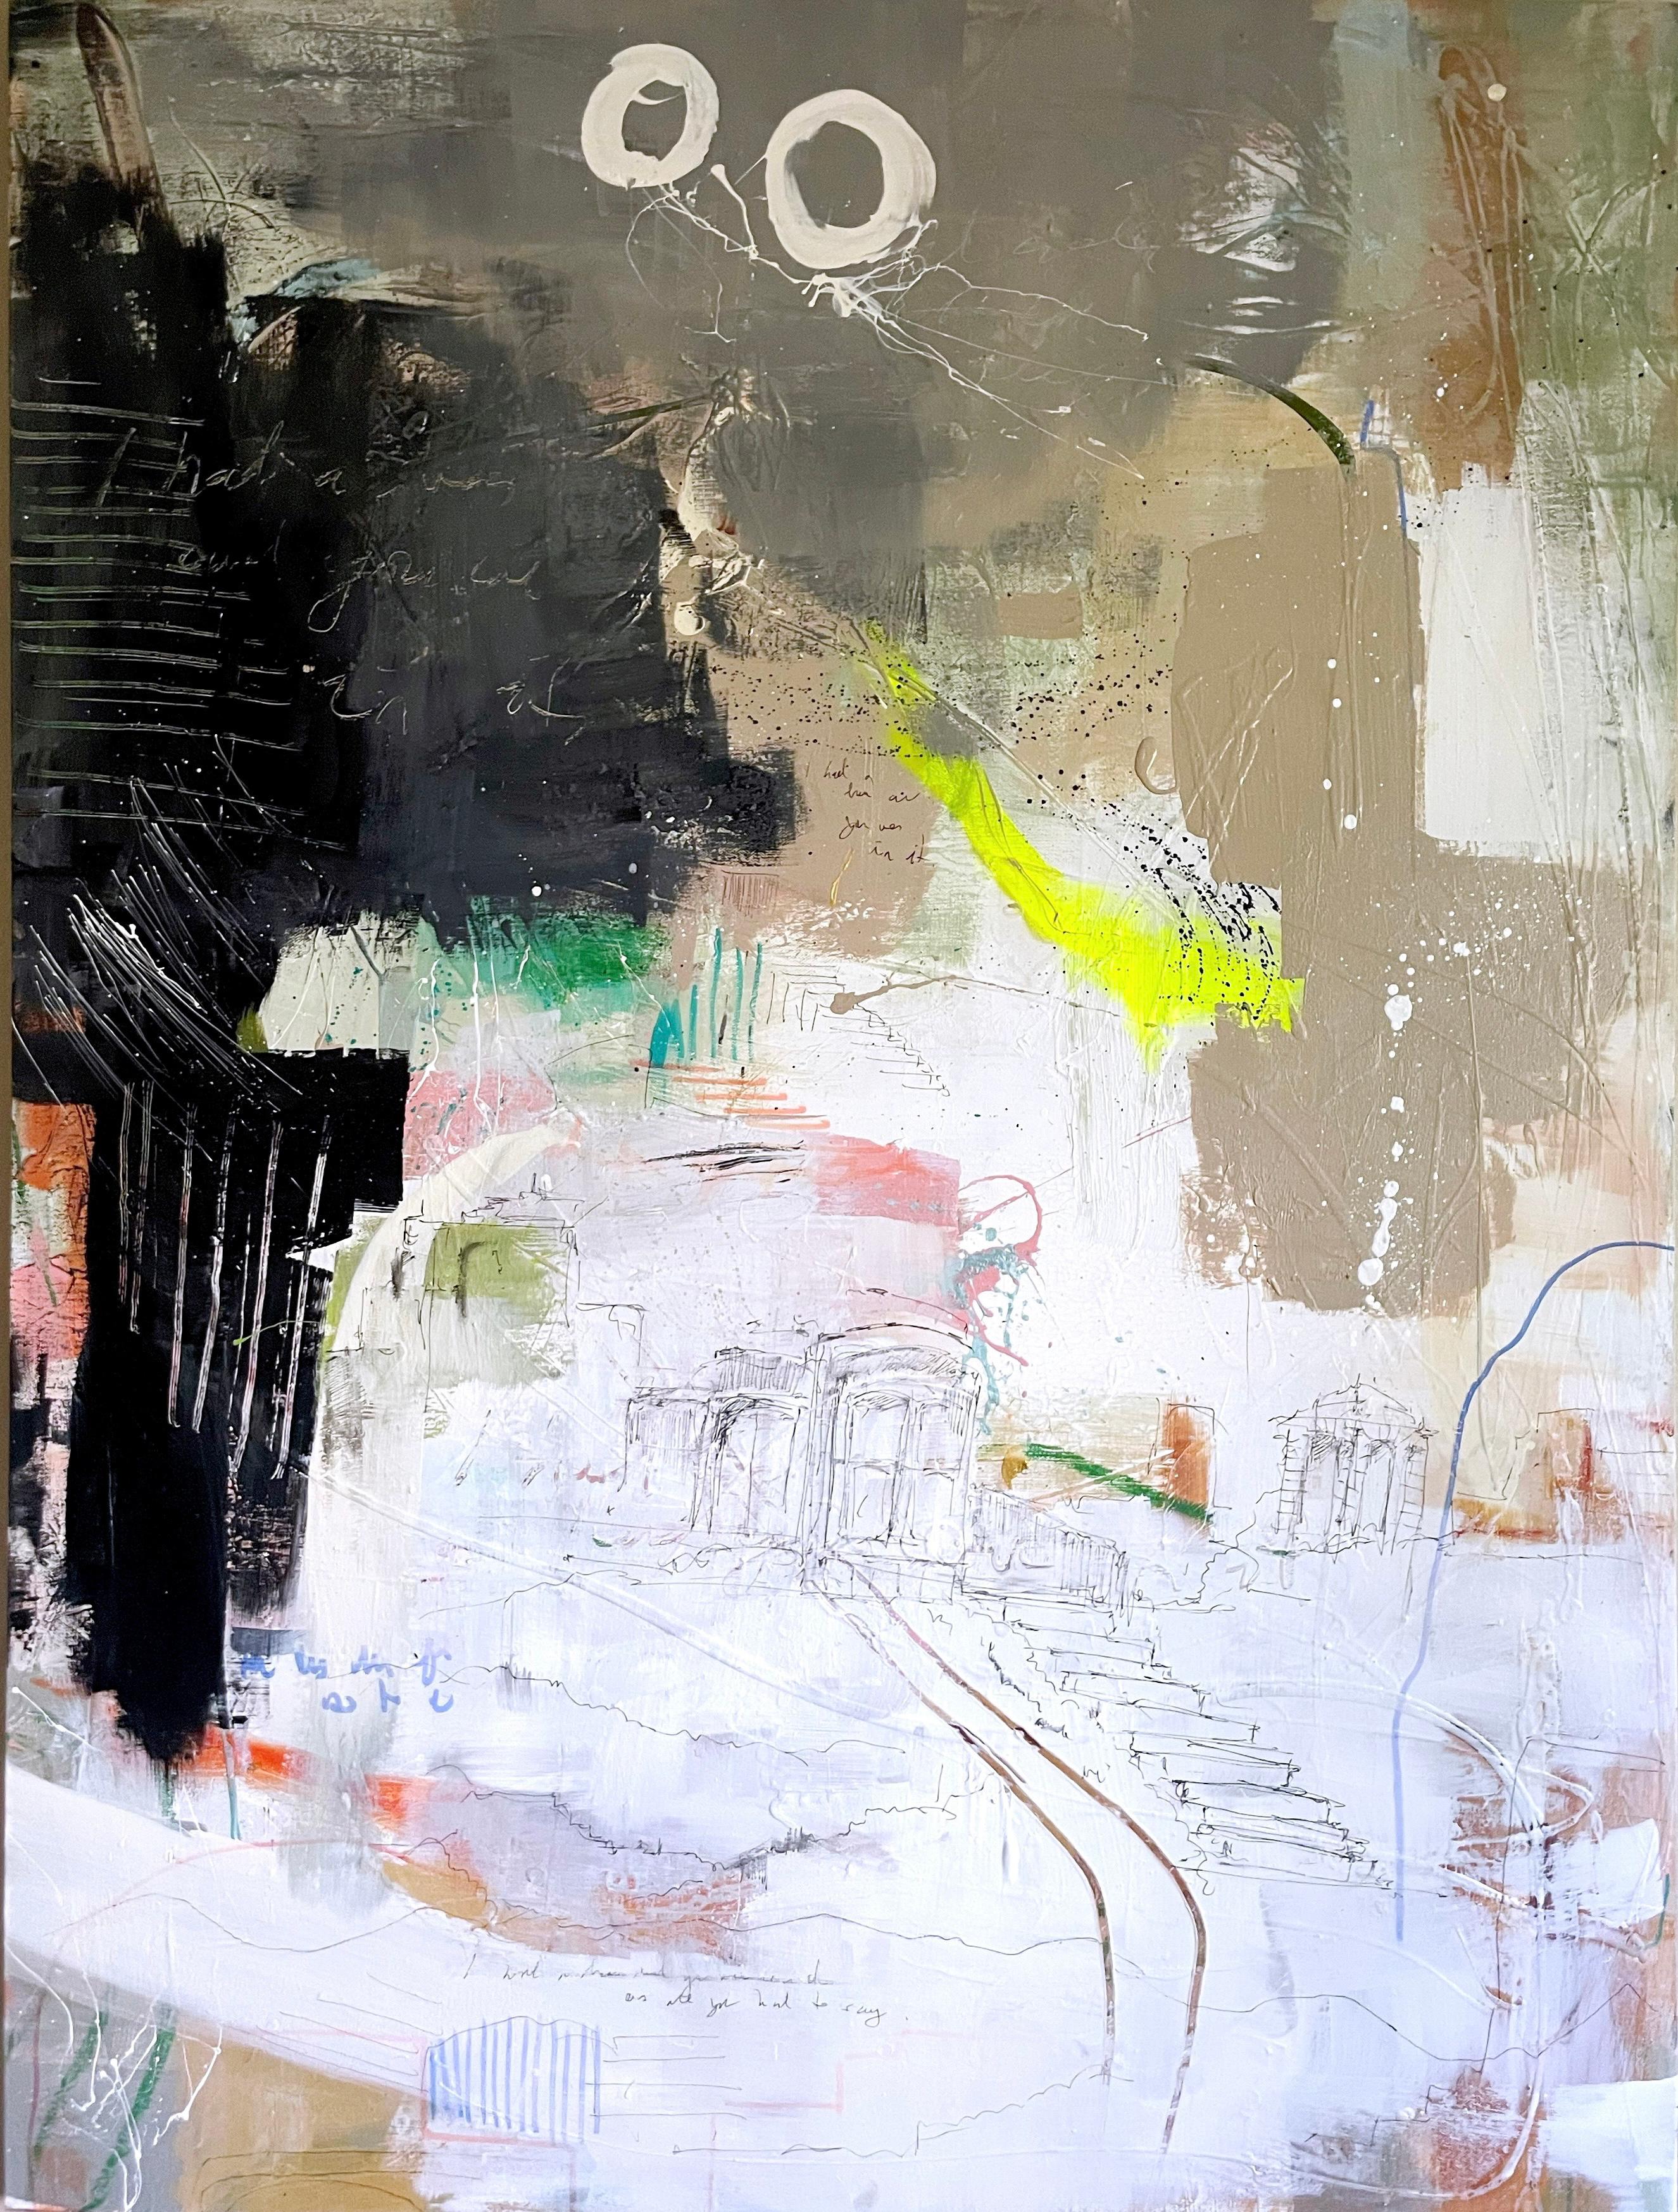 Available at Madelyn Jordon Fine Art. 'Dreams, 2' 2023 by Contemporary American artist, Rachel M. Mac. Acrylic, pencil, ink and oil pastel on stretched canvas, 48 x 36 in.  This painting incorporates mostly a muted palette of colors in white, tan,